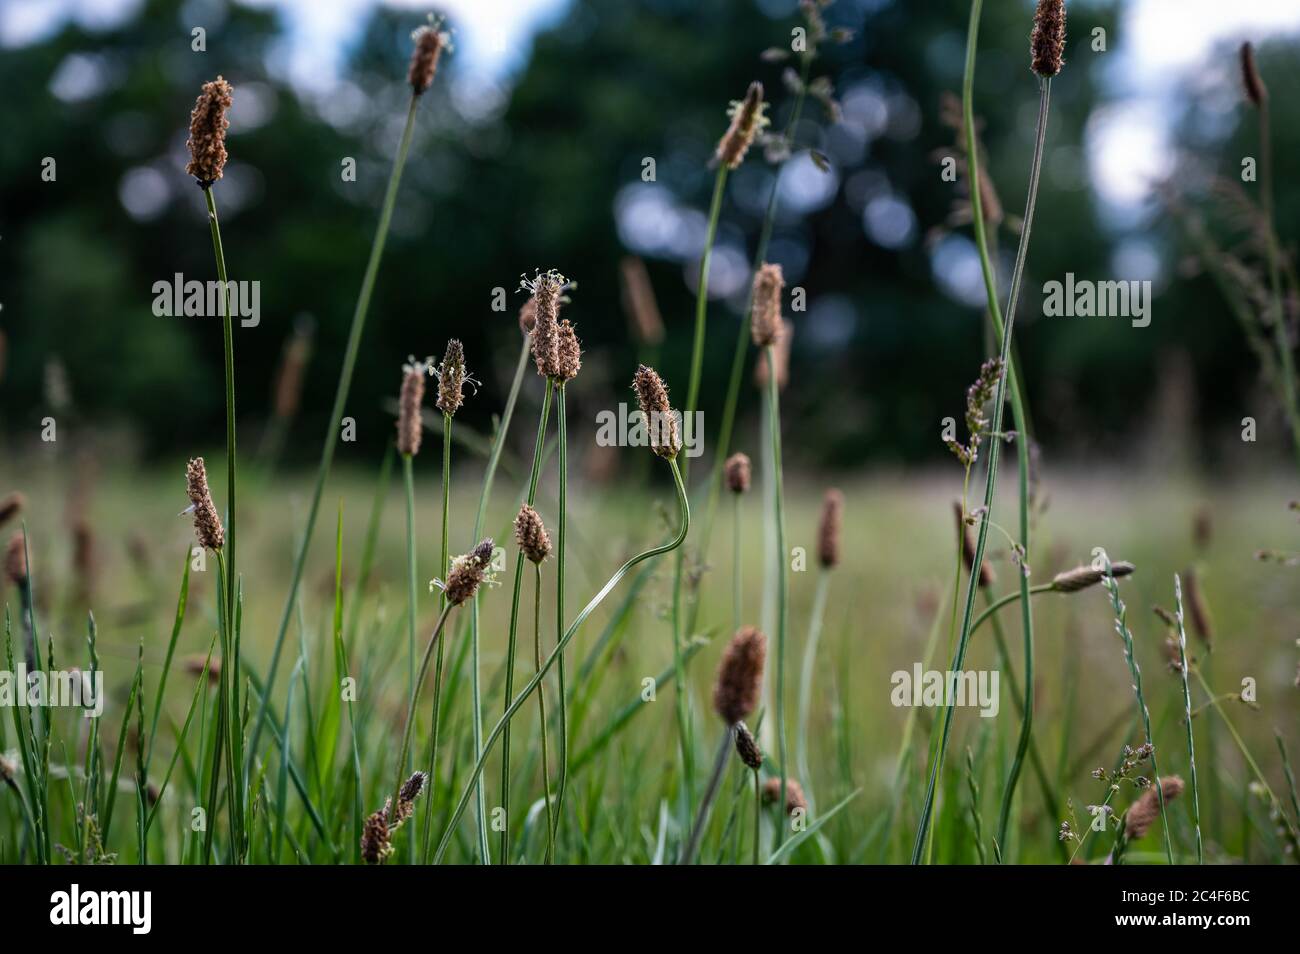 Selective focus of eleocharis palustris in a field under the sunlight with a blurry background Stock Photo